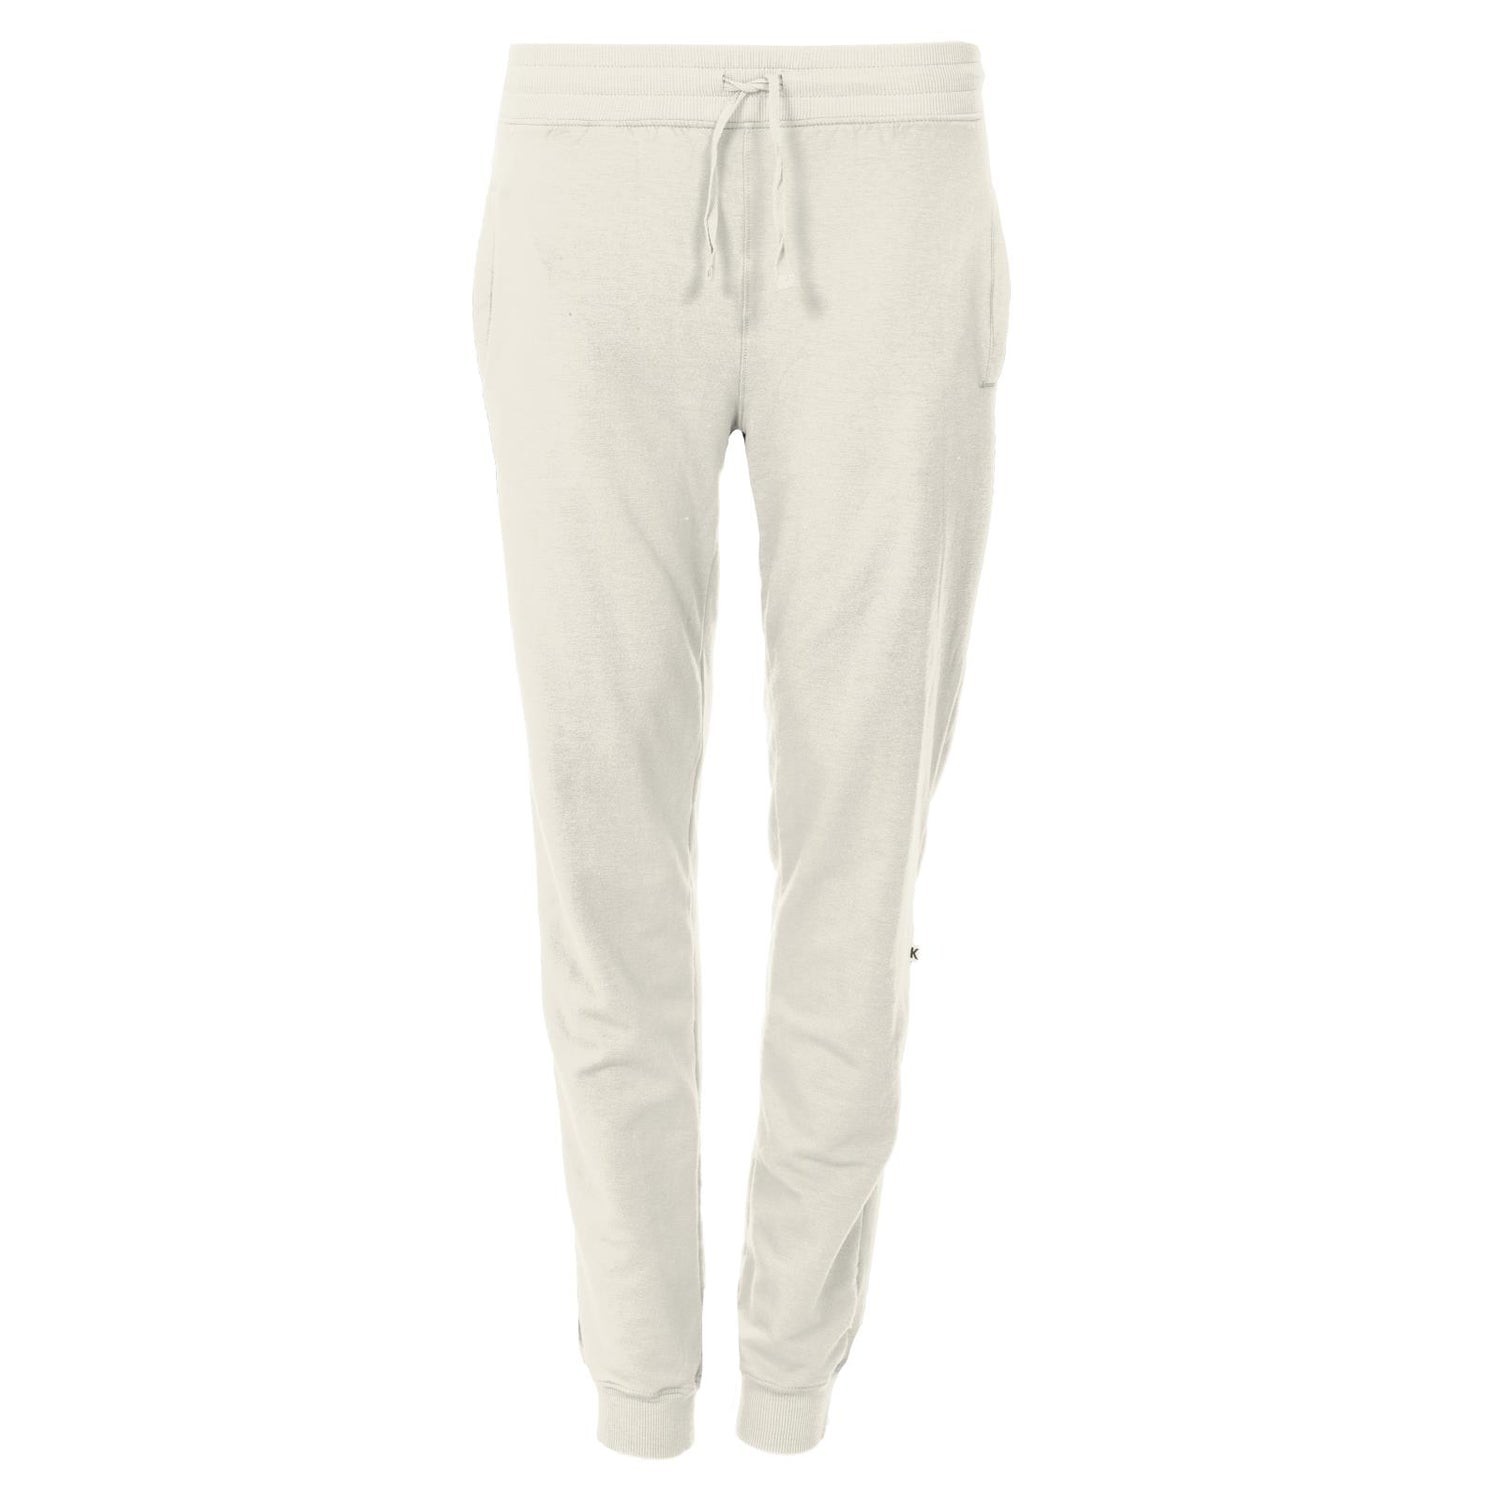 Women's Solid Fleece Lounge Joggers in Natural